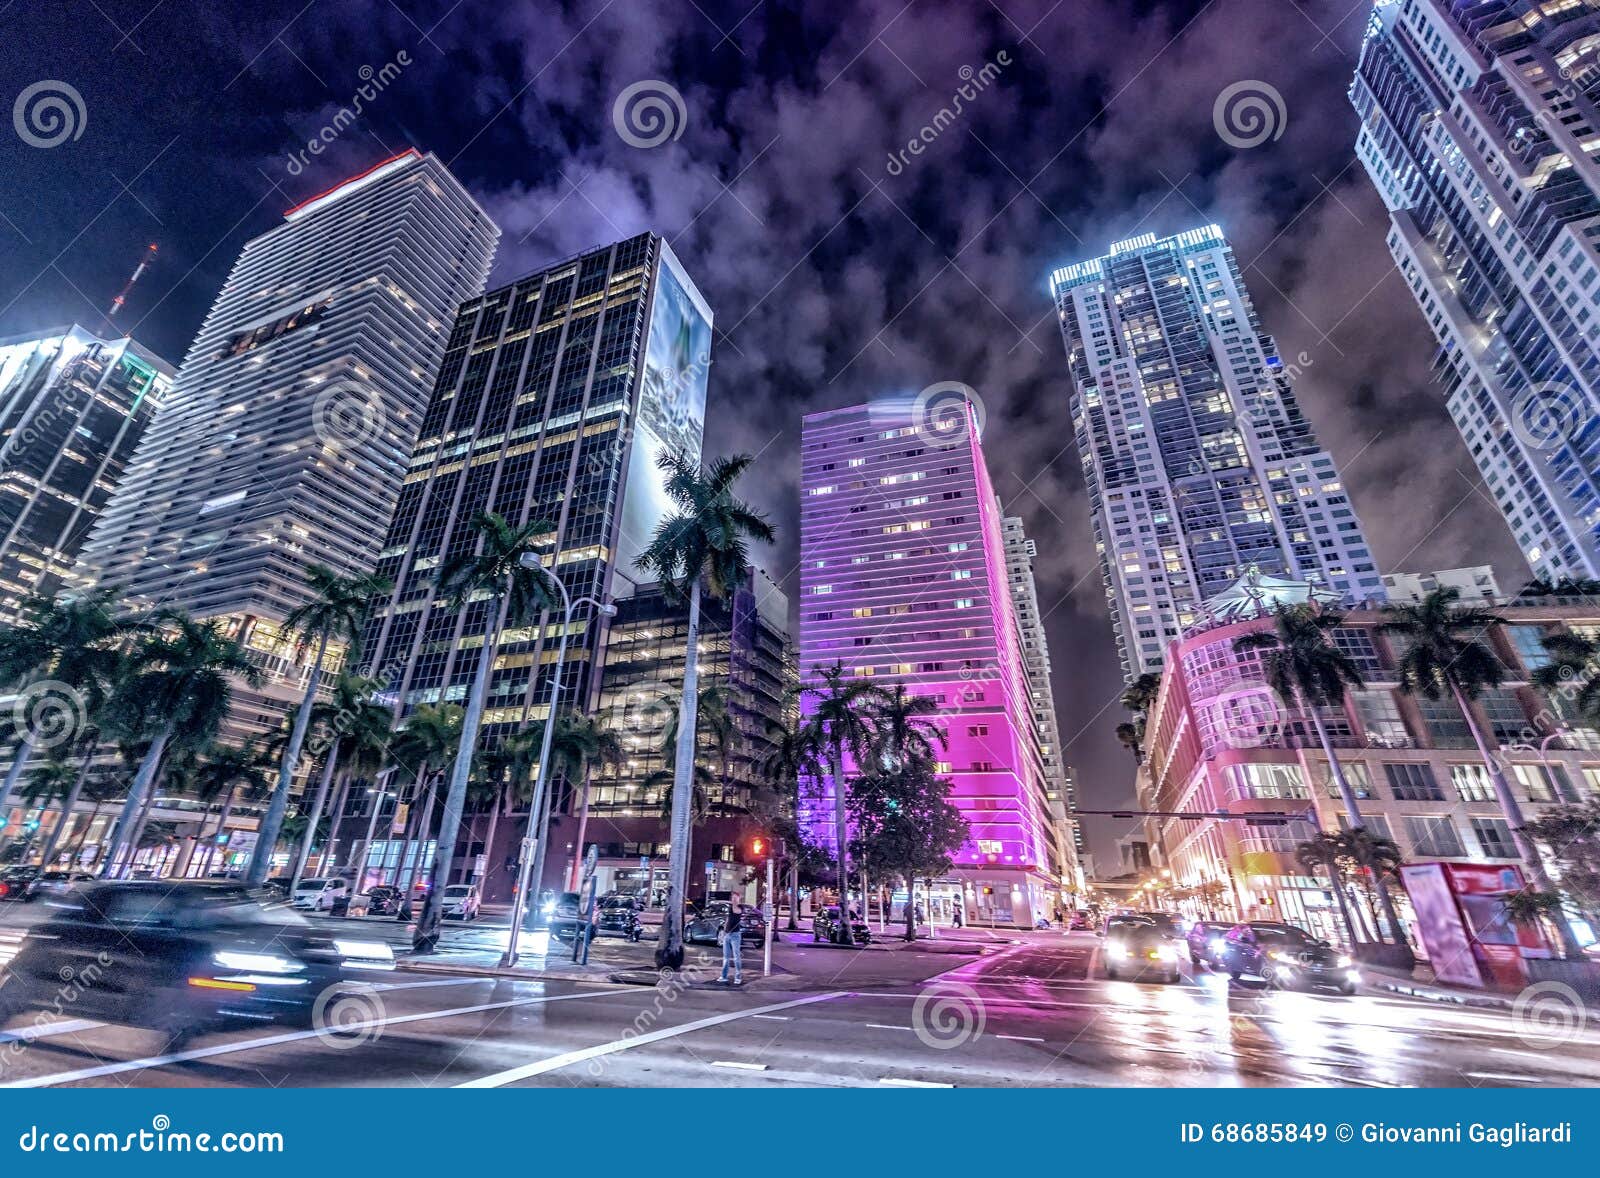 streets and buildings of downtown miami at night